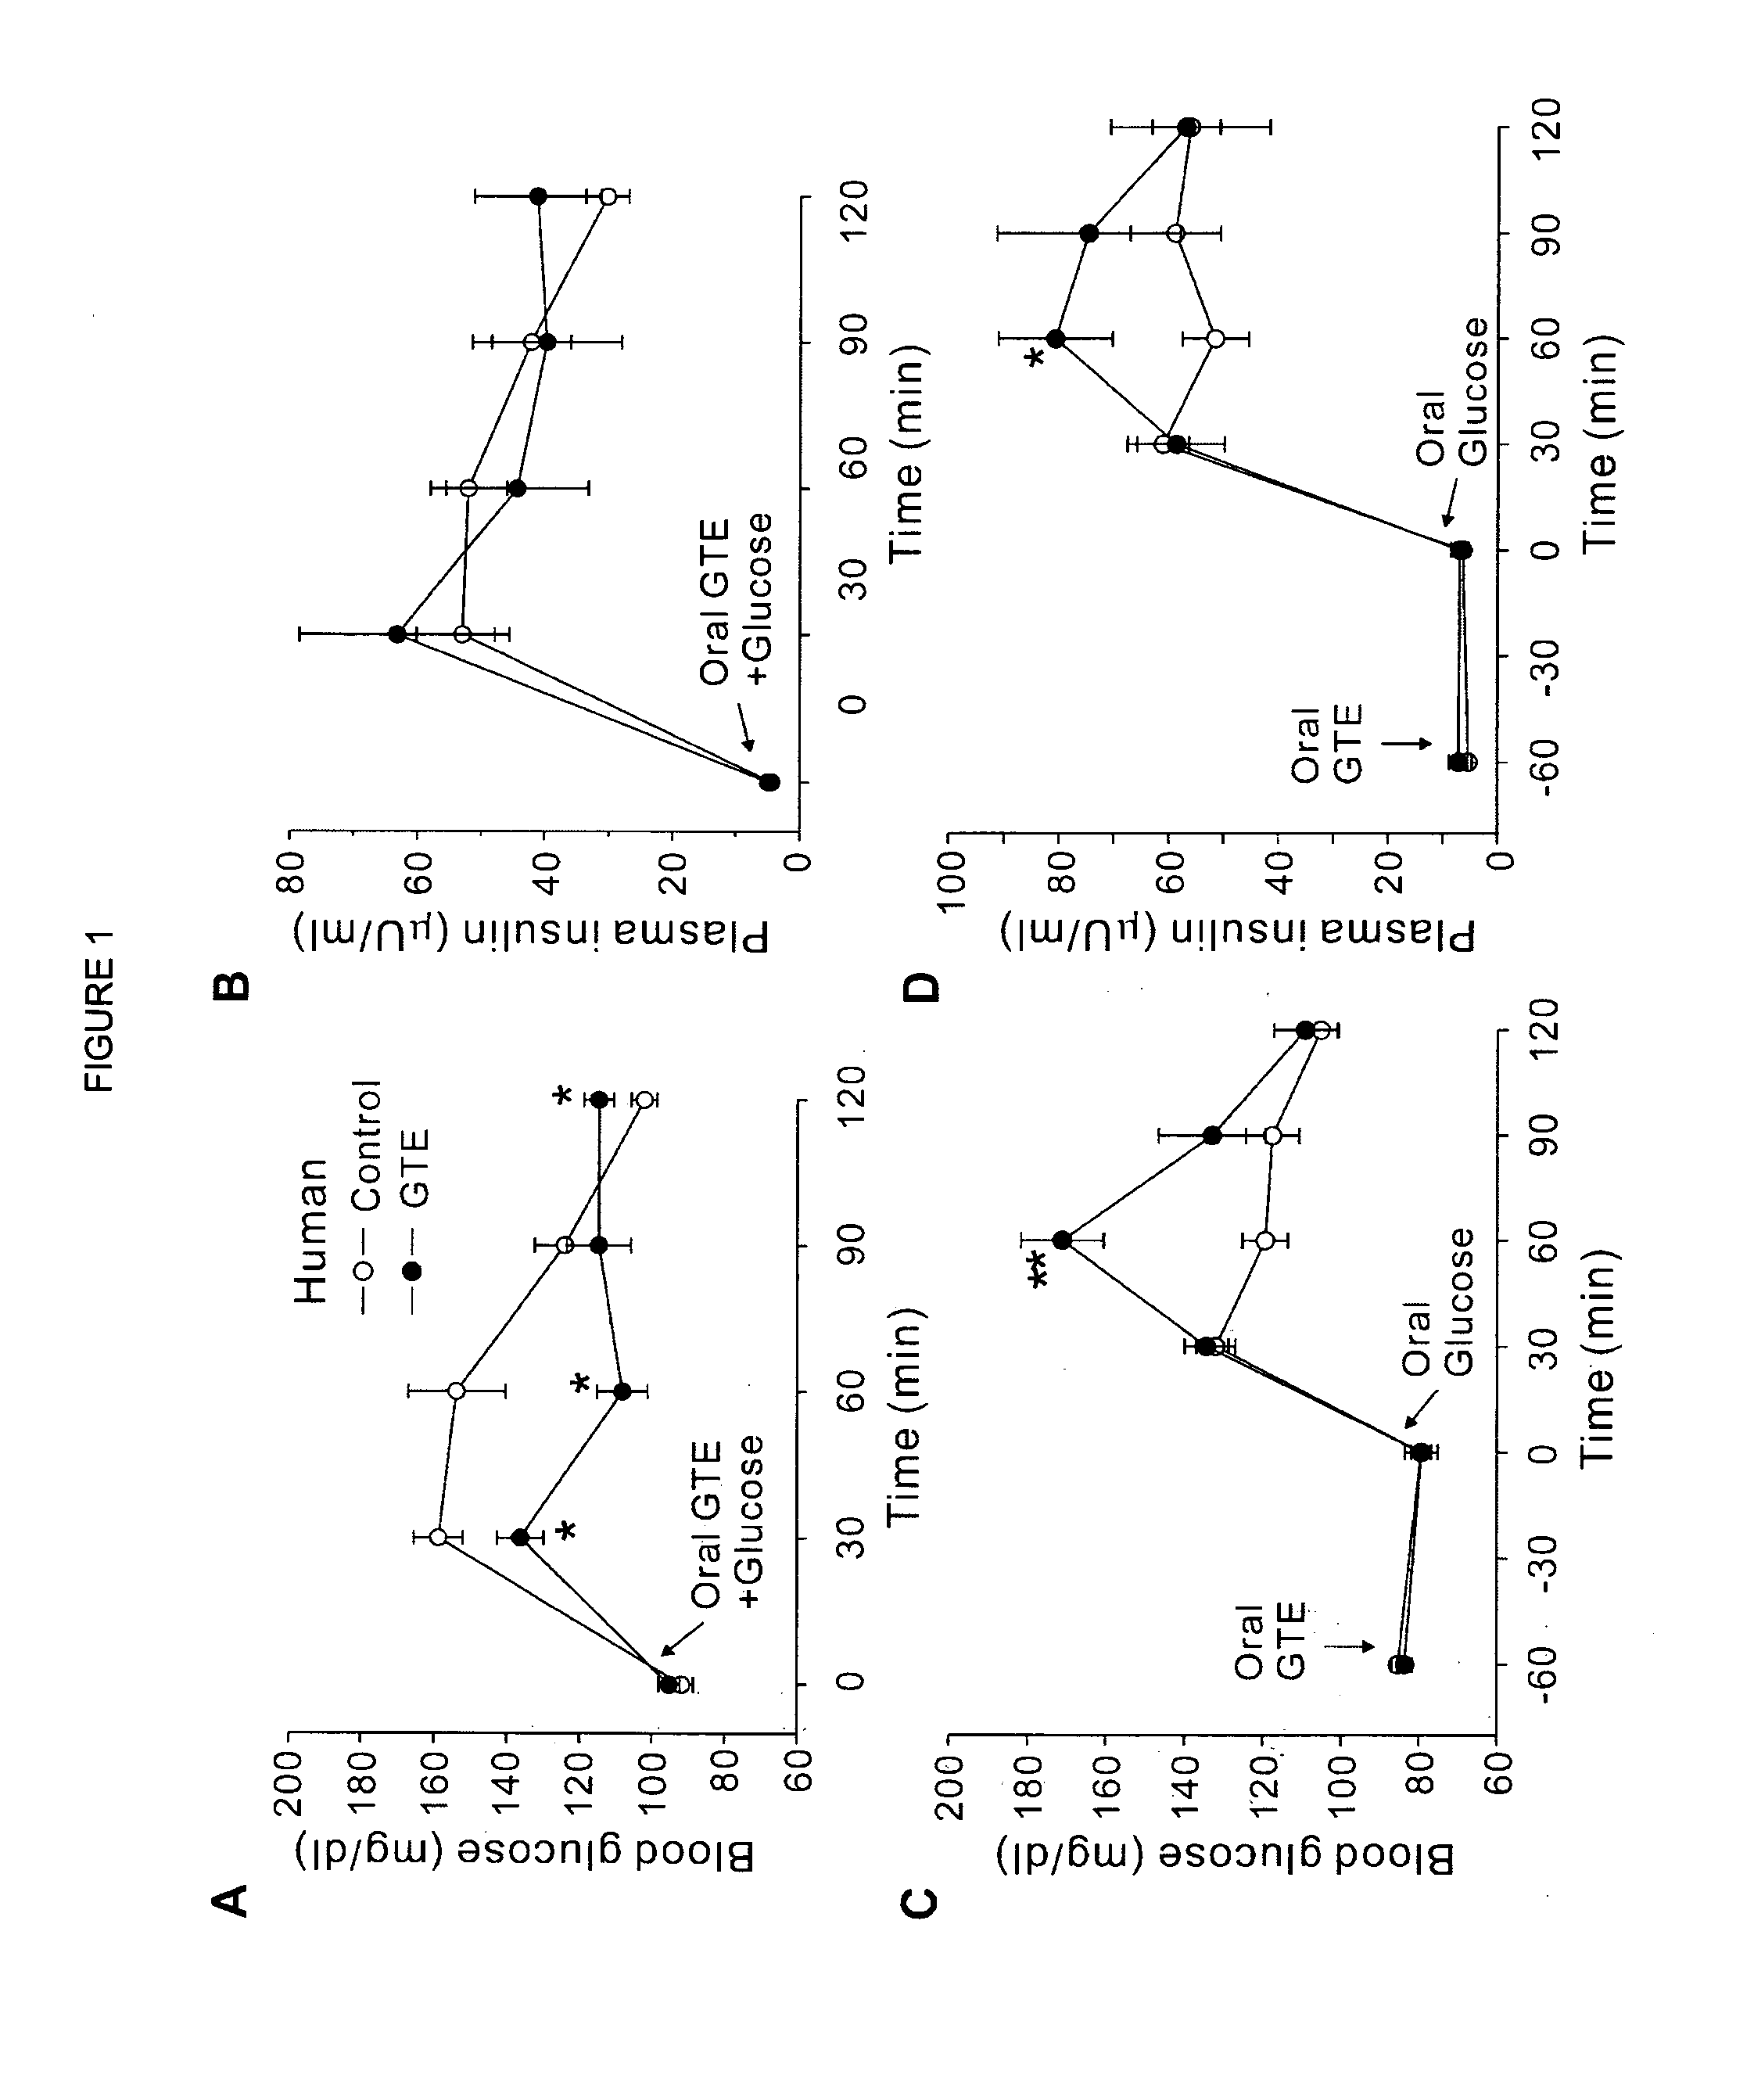 Composition for controlling increase in blood glucose